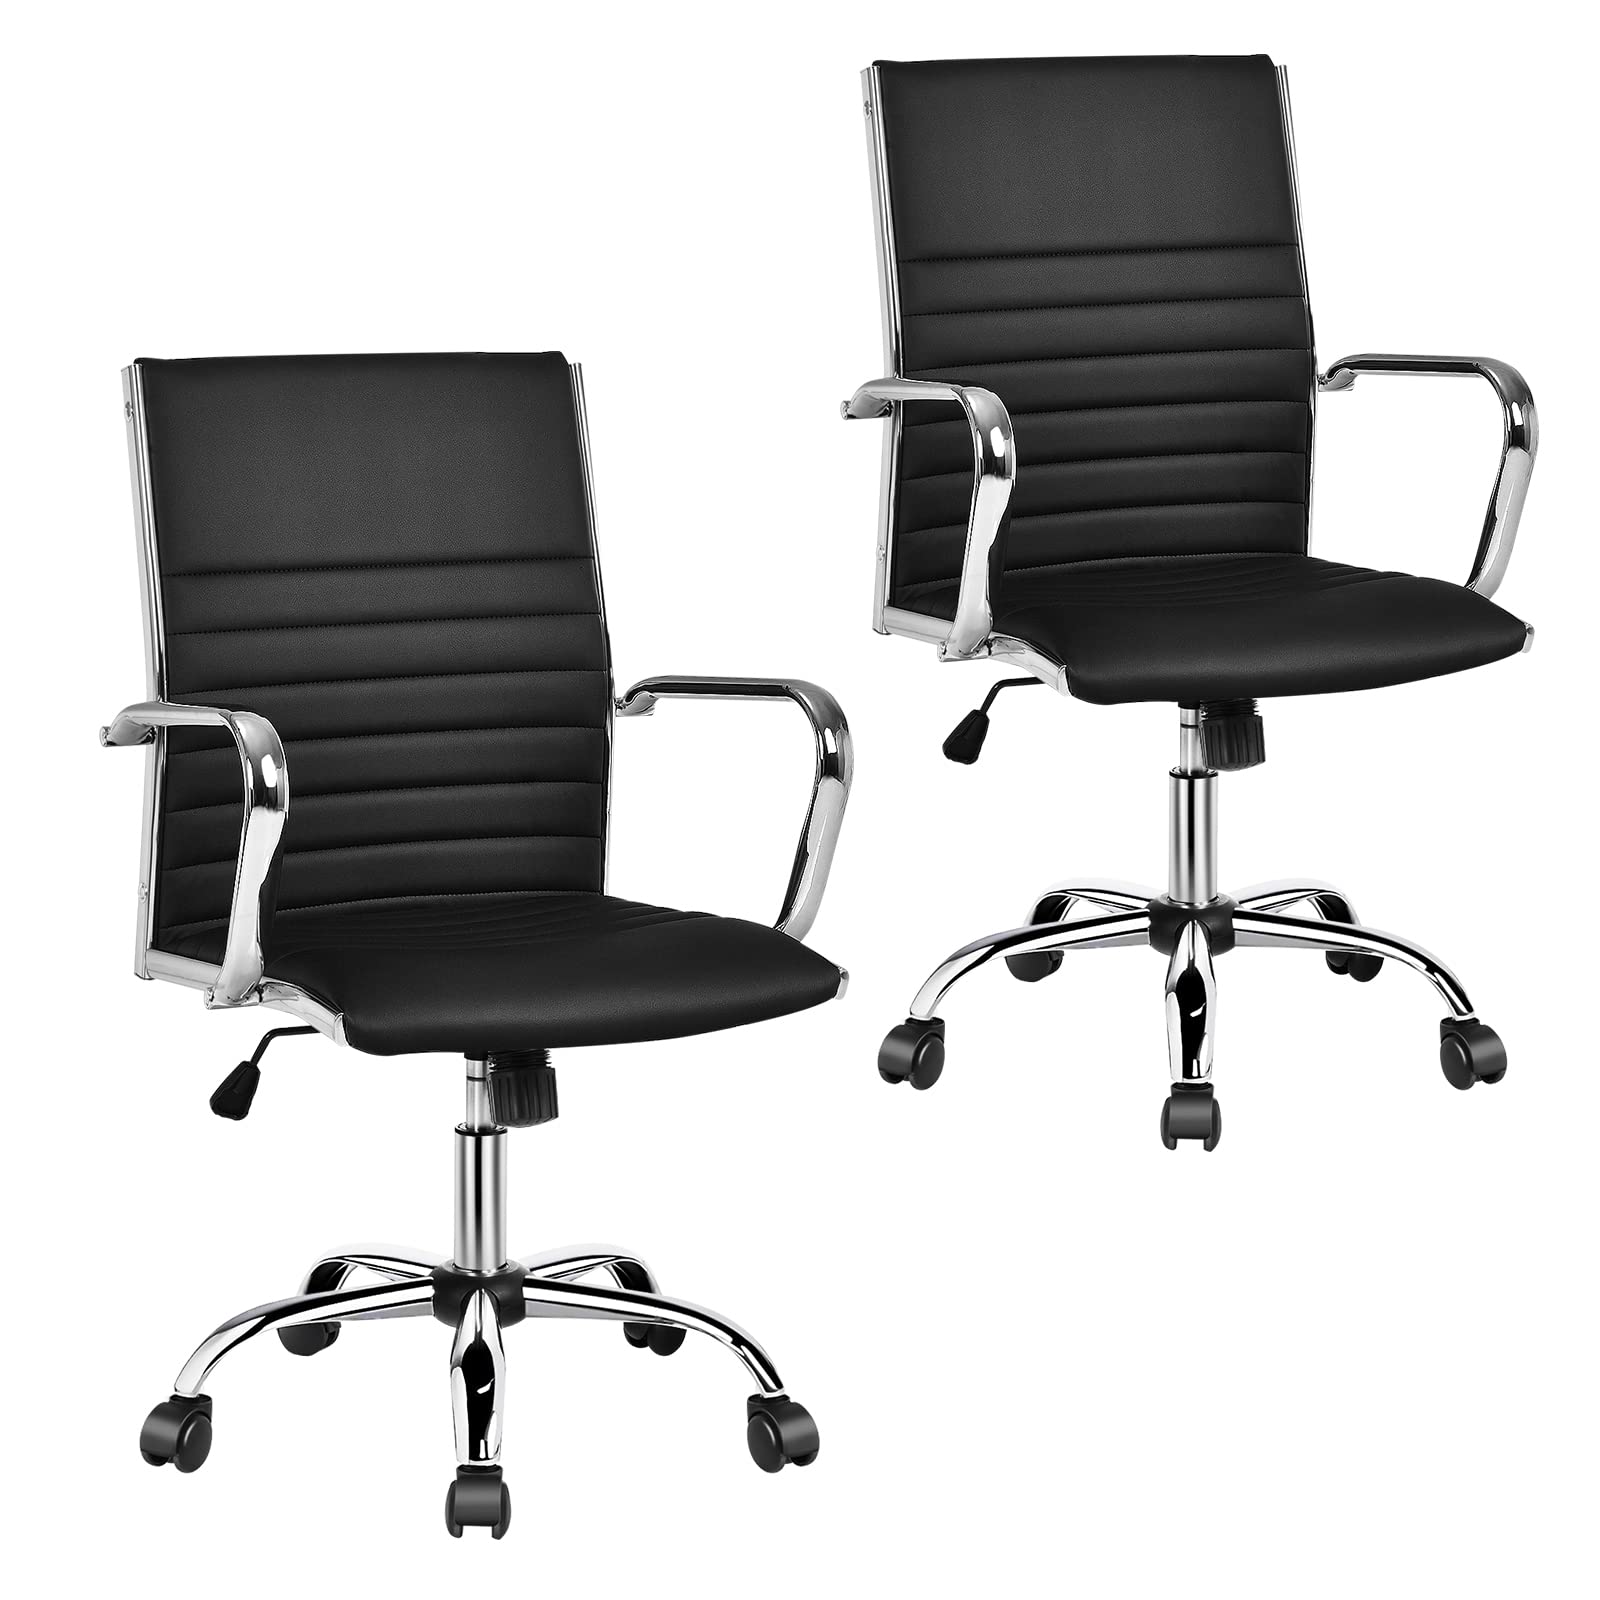 Ribbed Office Chair, Ergonomic High Back Executive Conference Chair